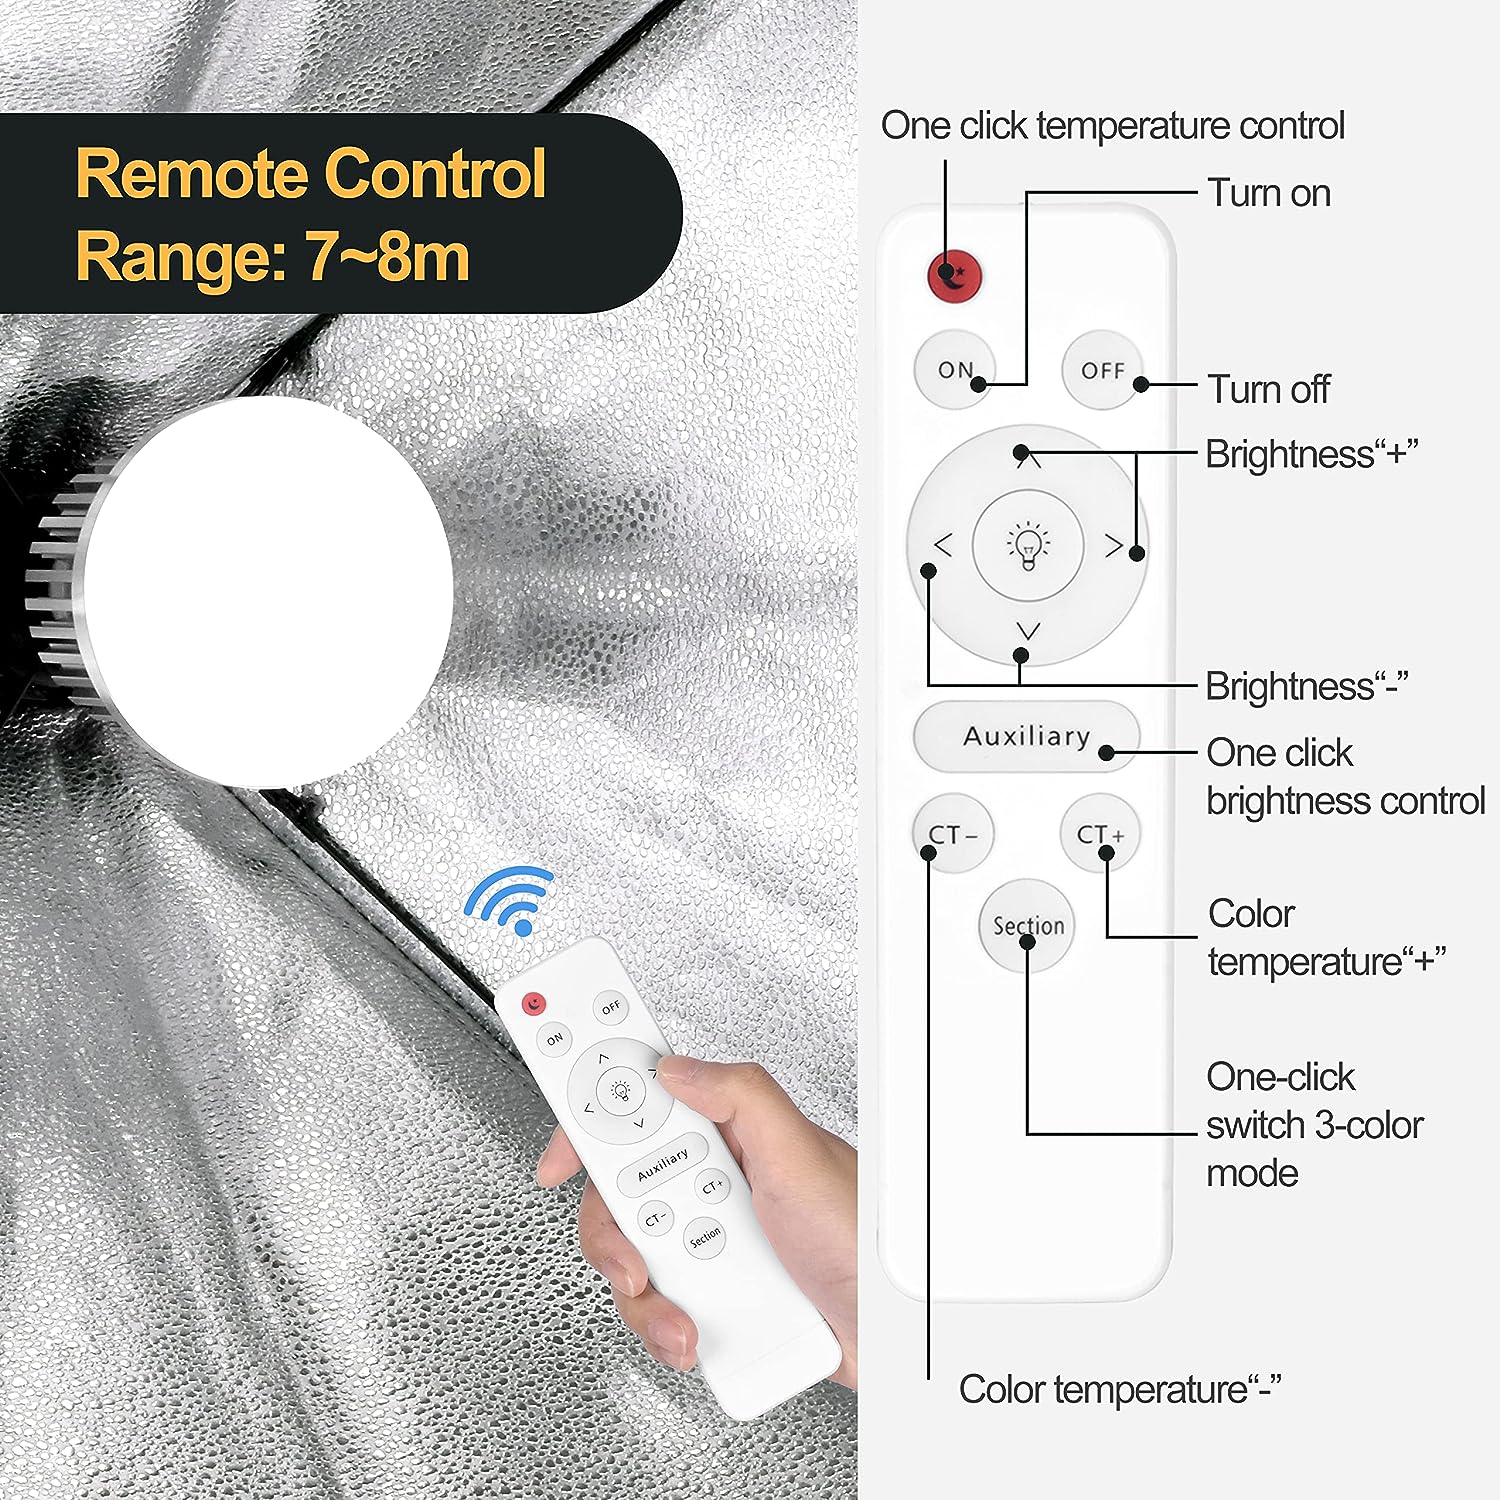 Remote control for light bulb or fan